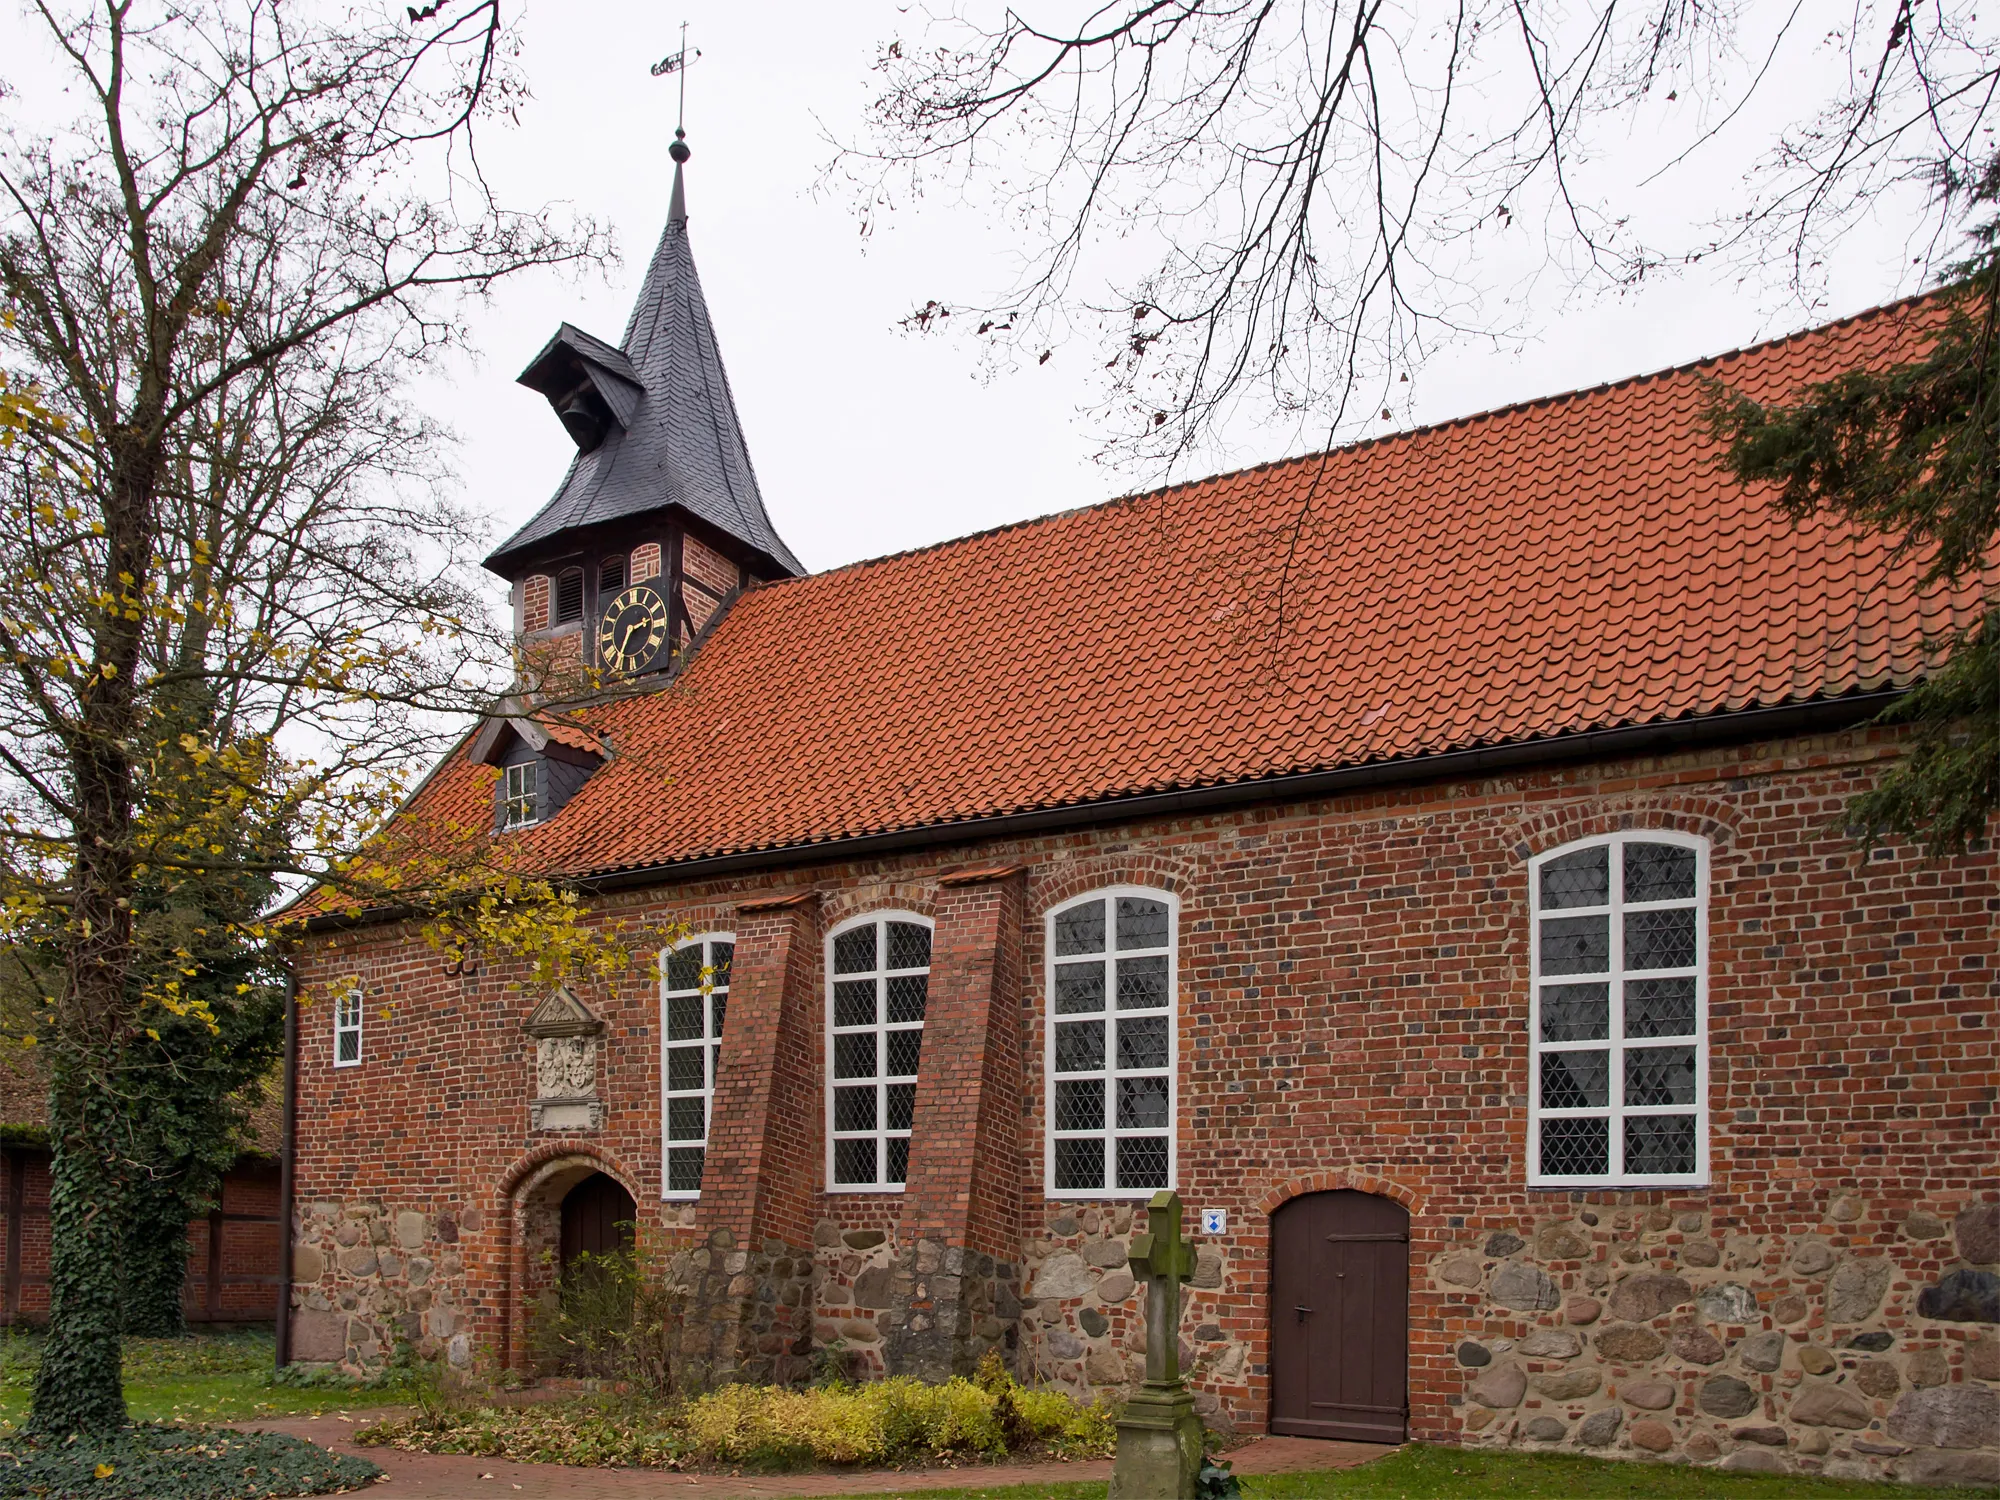 Photo showing: Chapel in the small village "Breese im Bruche", Wendland, Germany.